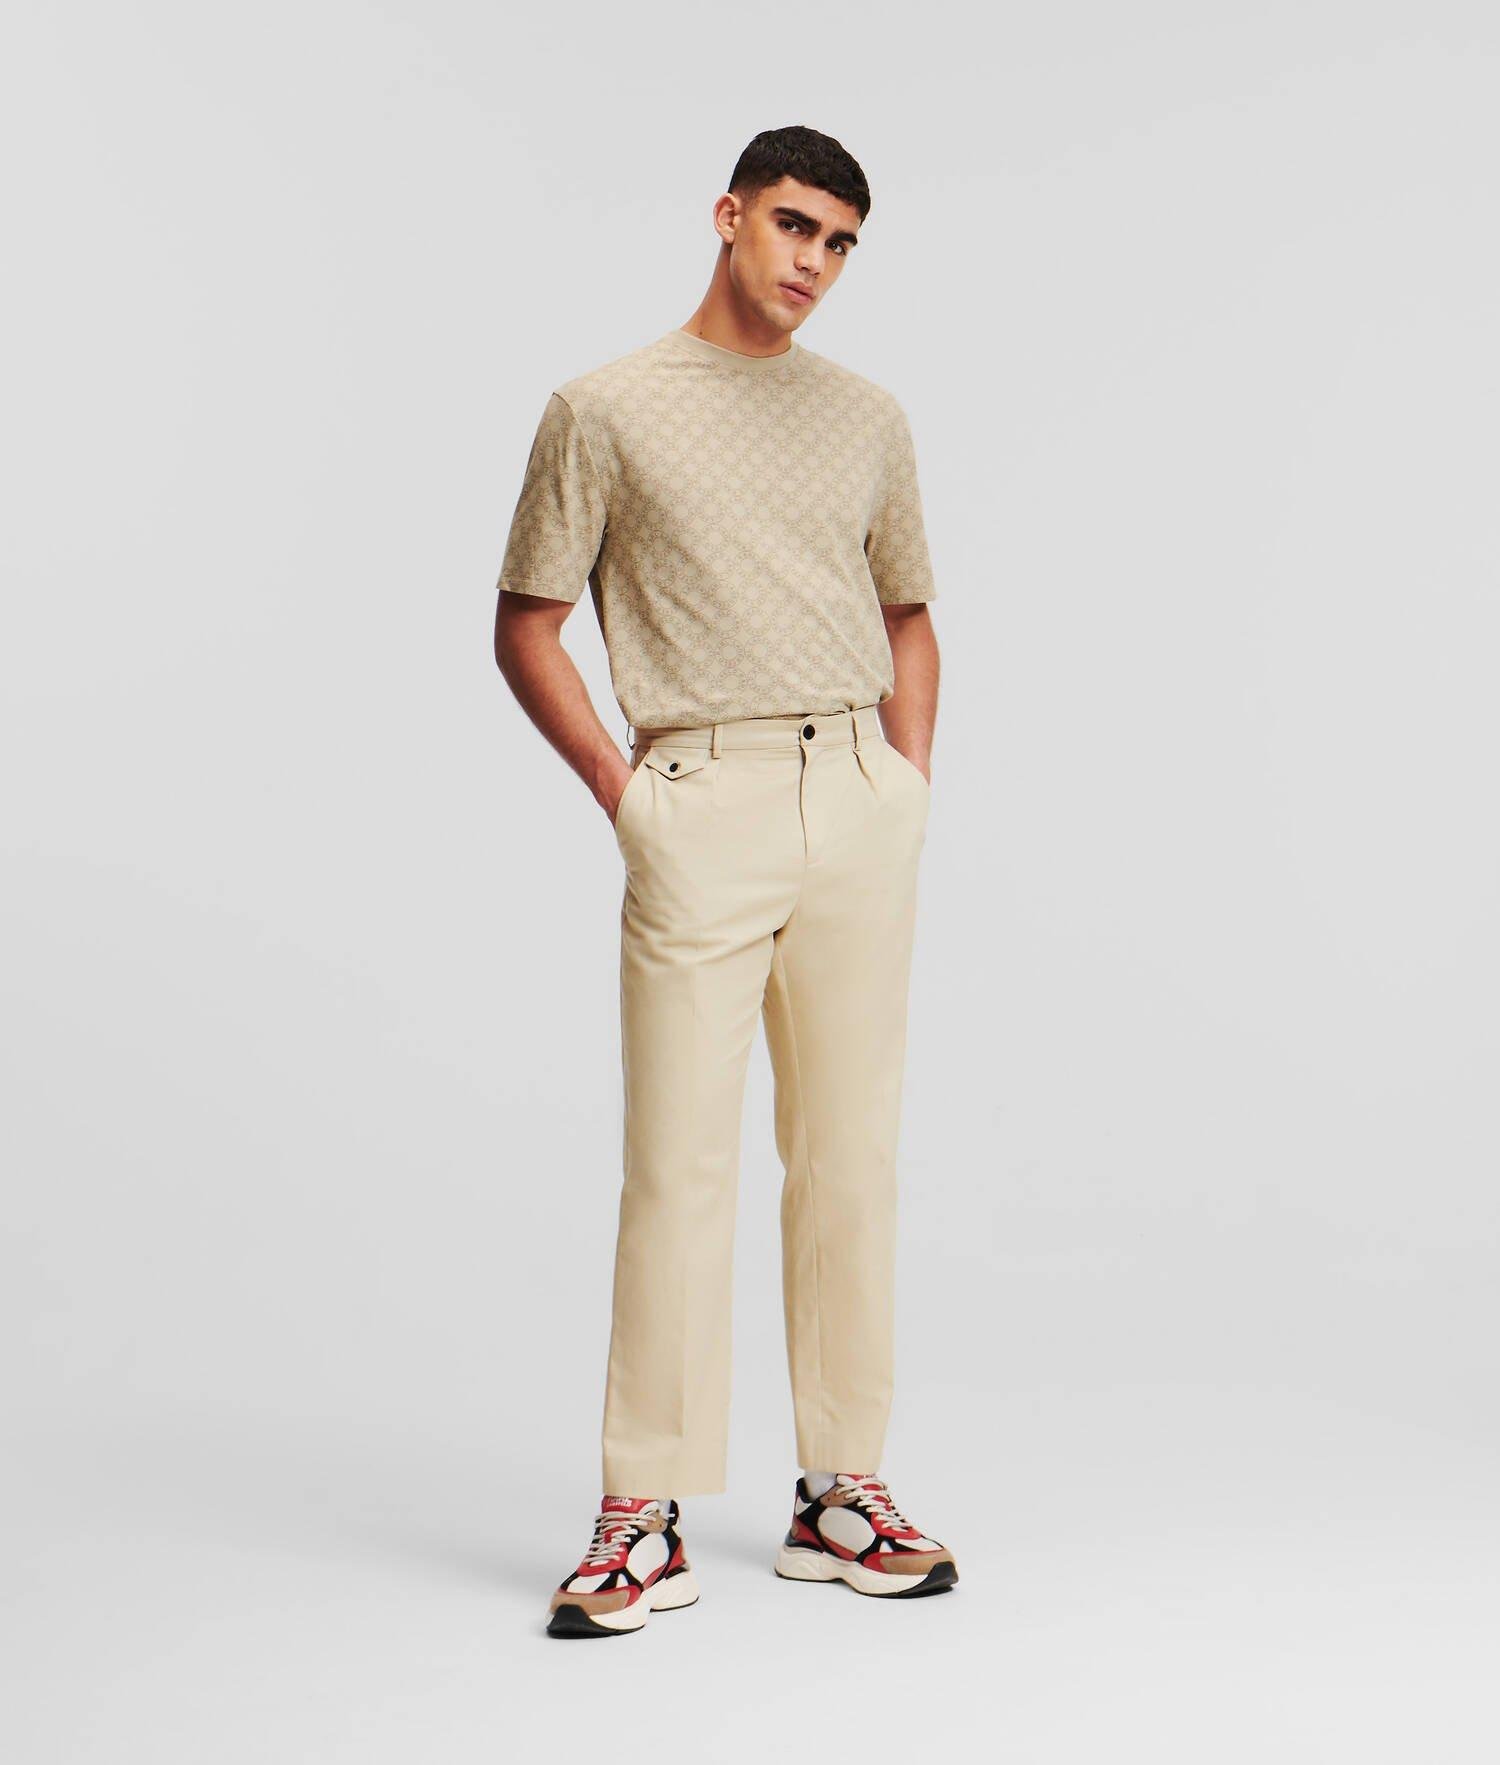 CLASSIC CHINO PANTS by KARL LAGERFELD